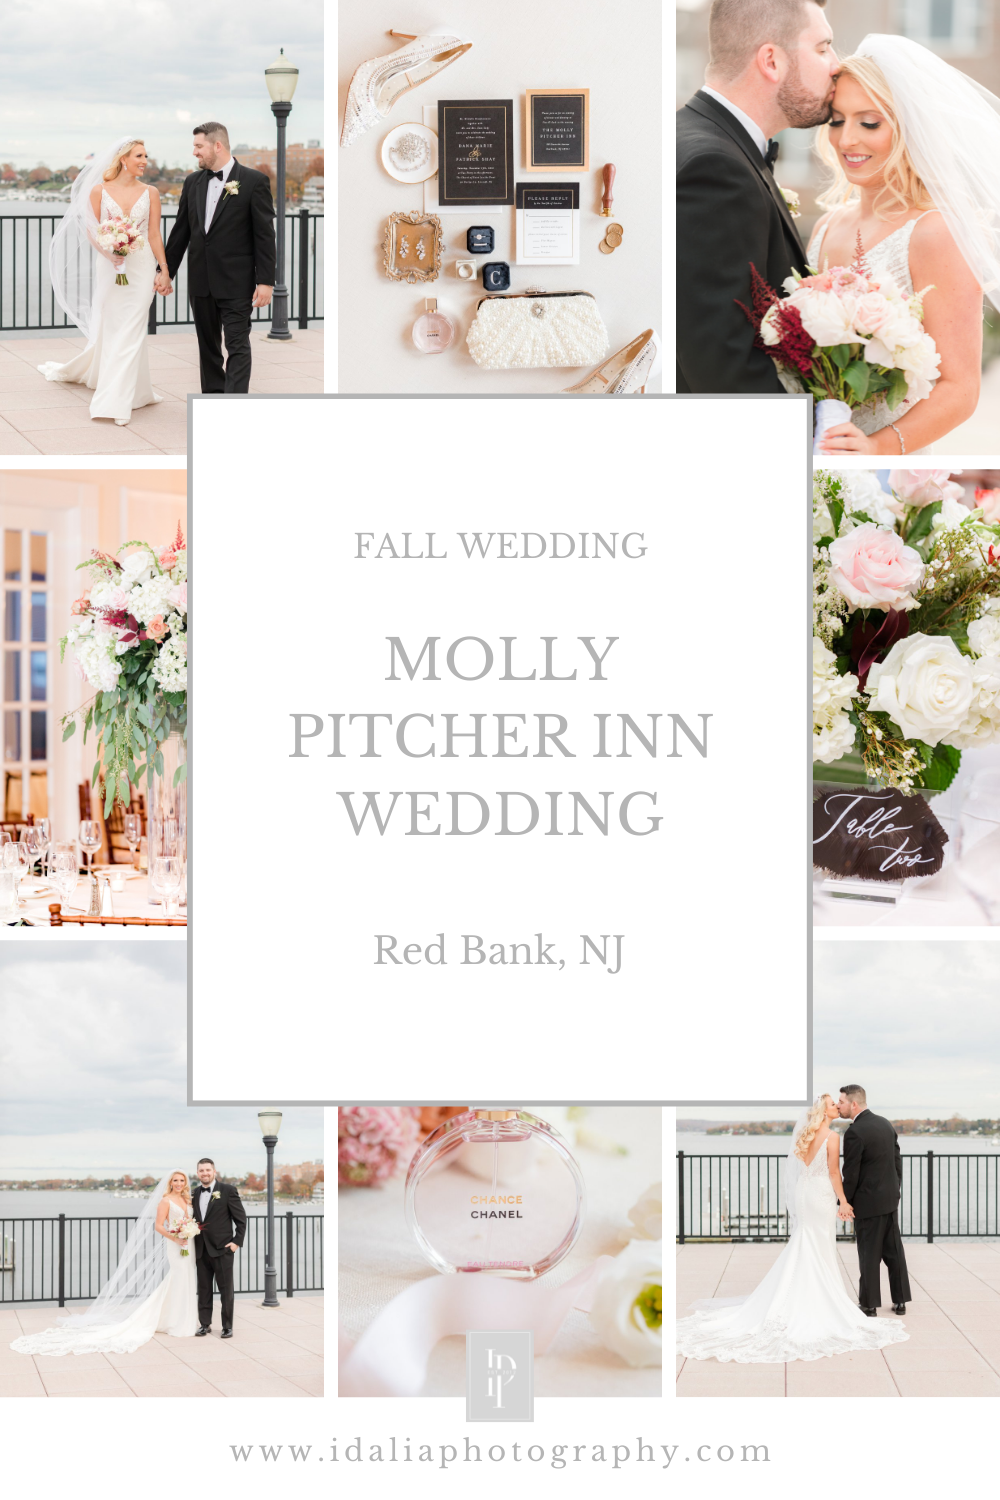 Timeless Wedding at the Molly Pitcher Inn in Red Bank, NJ photographed by New Jersey wedding photographer Idalia Photography